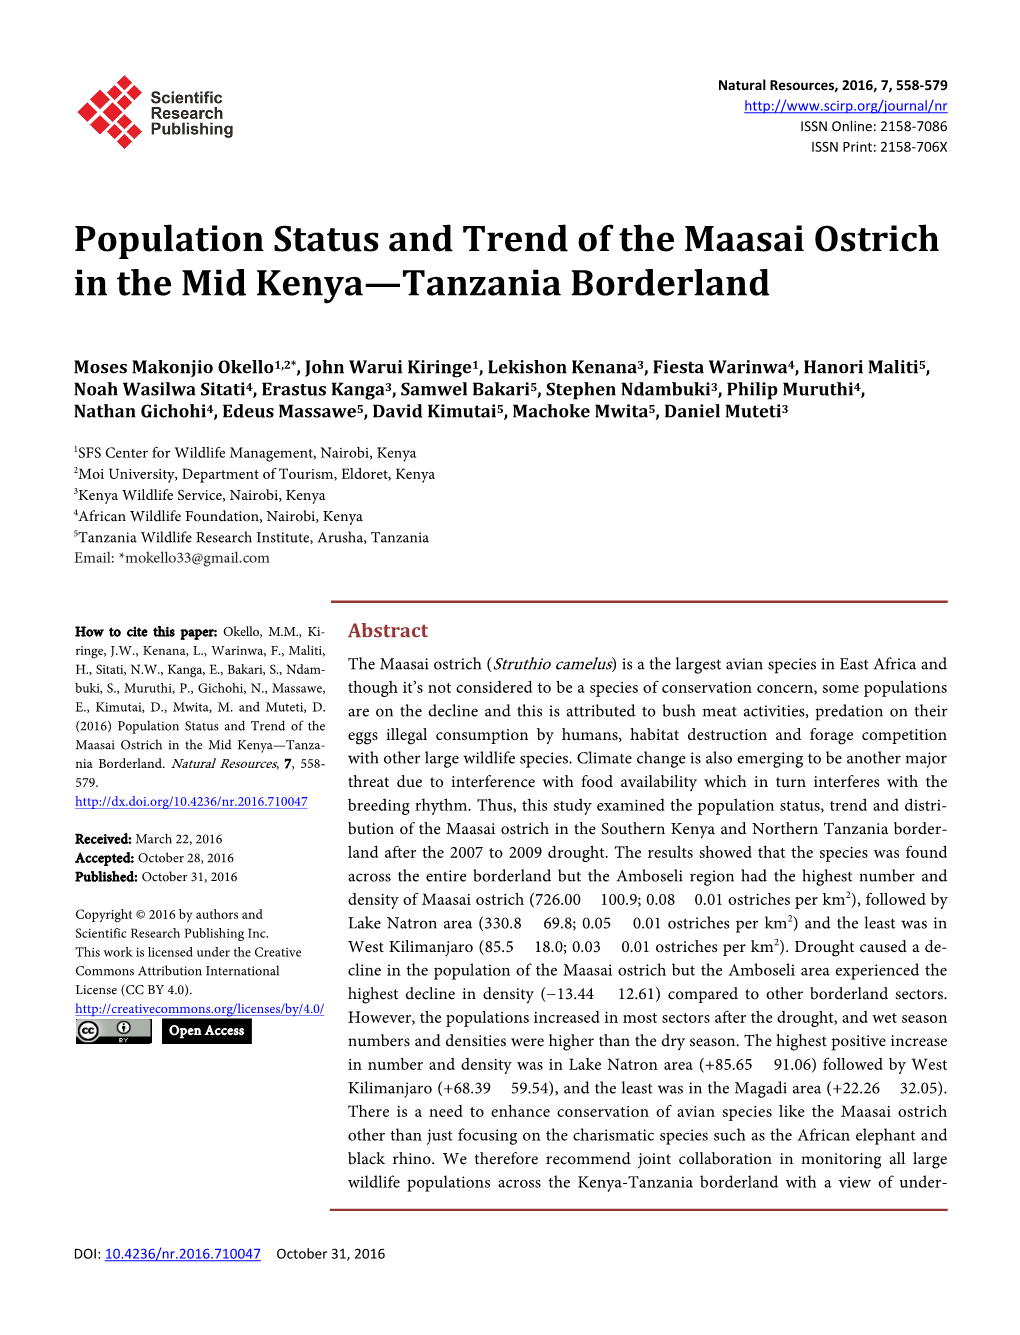 Population Status and Trend of the Maasai Ostrich in the Mid Kenya—Tanzania Borderland